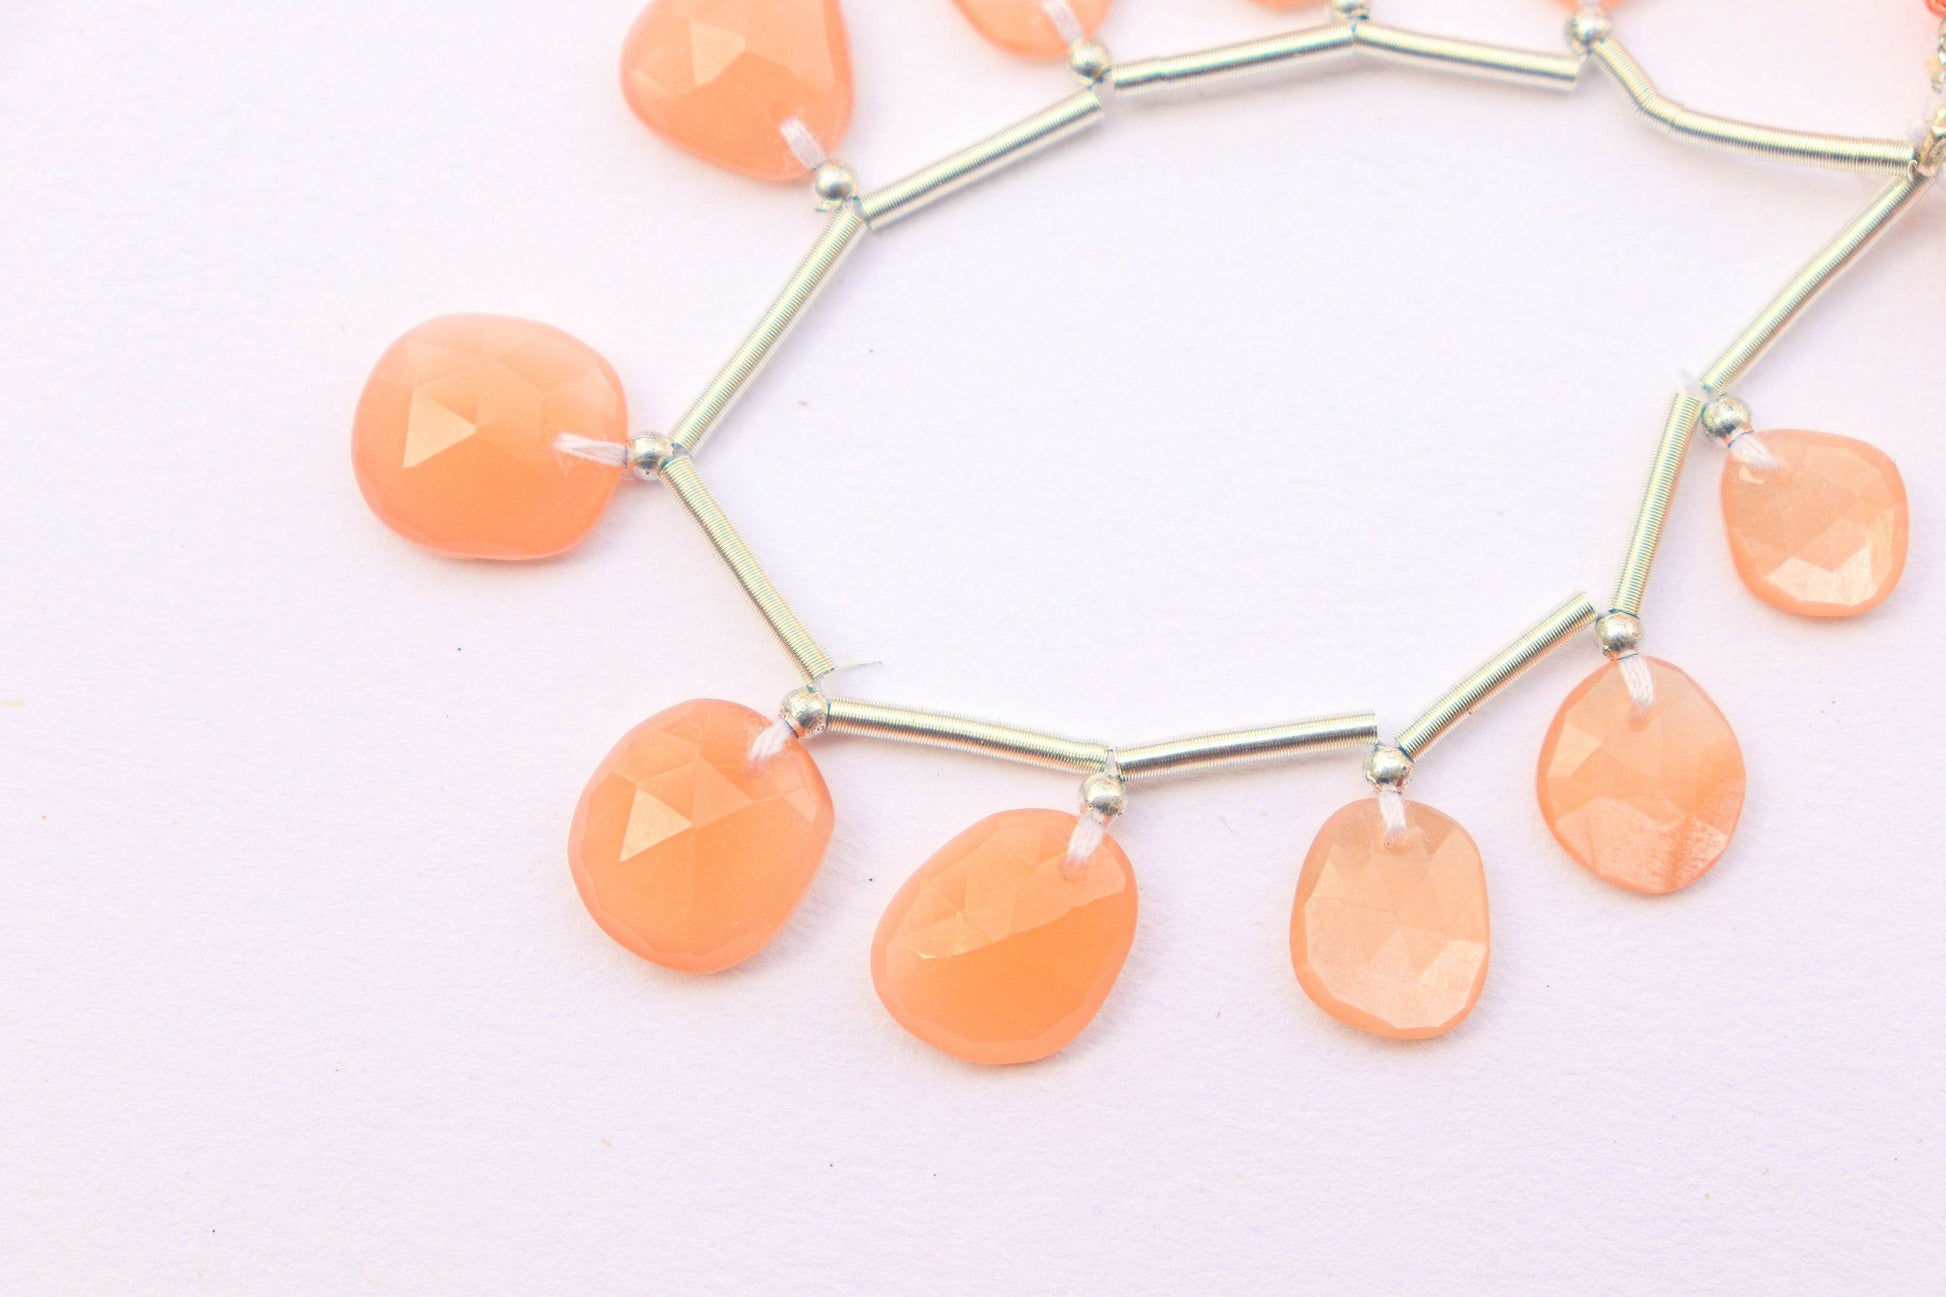 Peach Moonstone Faceted Uneven Shape Rose cut Briolette Beads, Natural Moonstone Gemstone Beads, 12 Pieces, 7x8mm to 12x13mm Beadsforyourjewelry